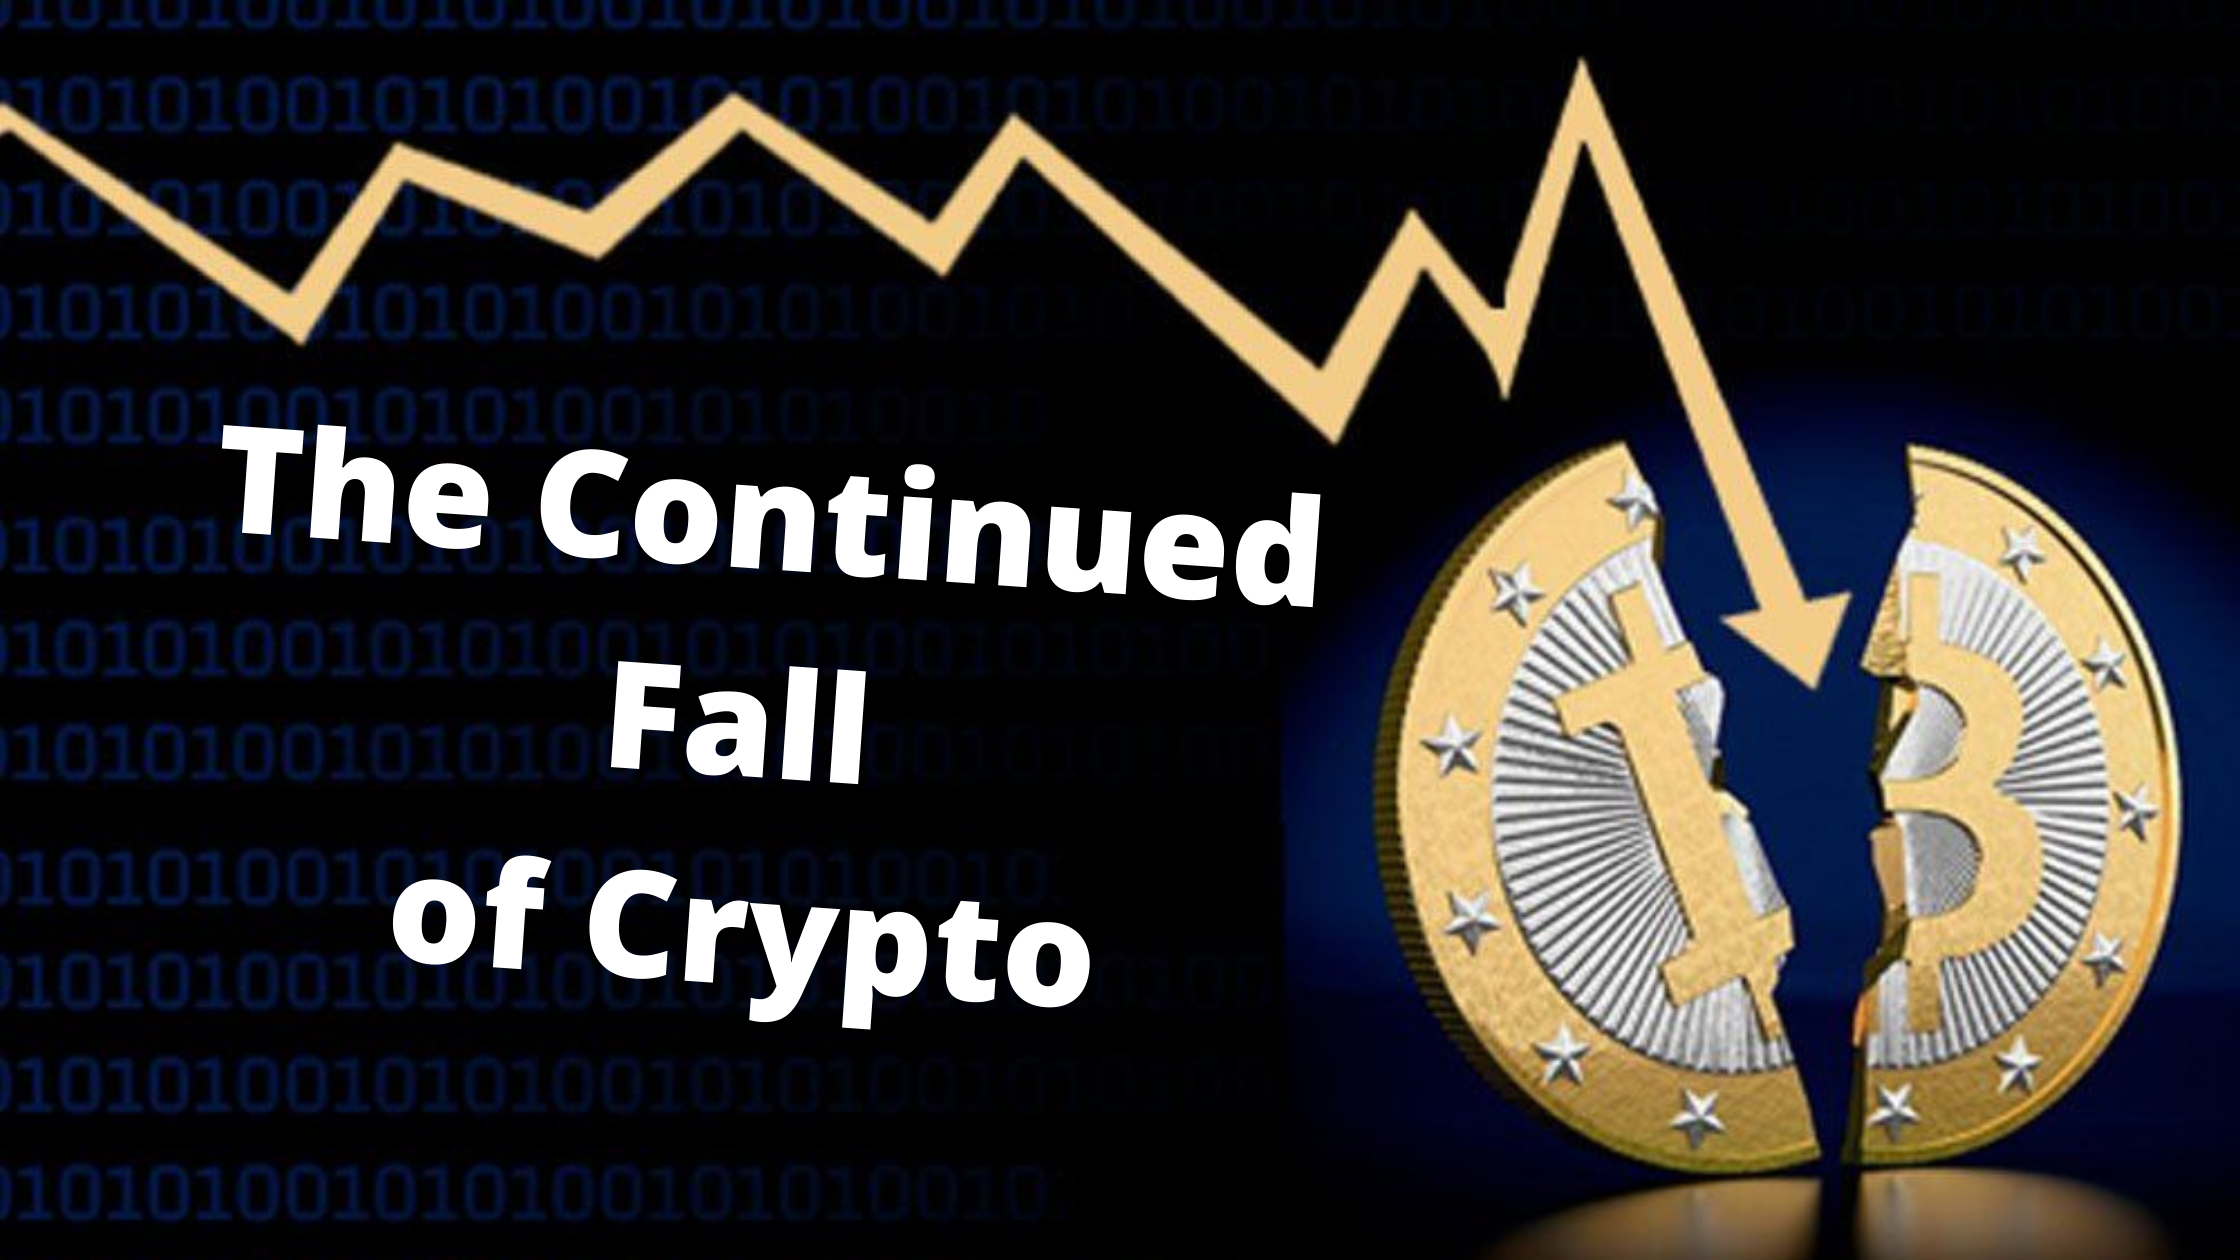 cryptos fall after conference